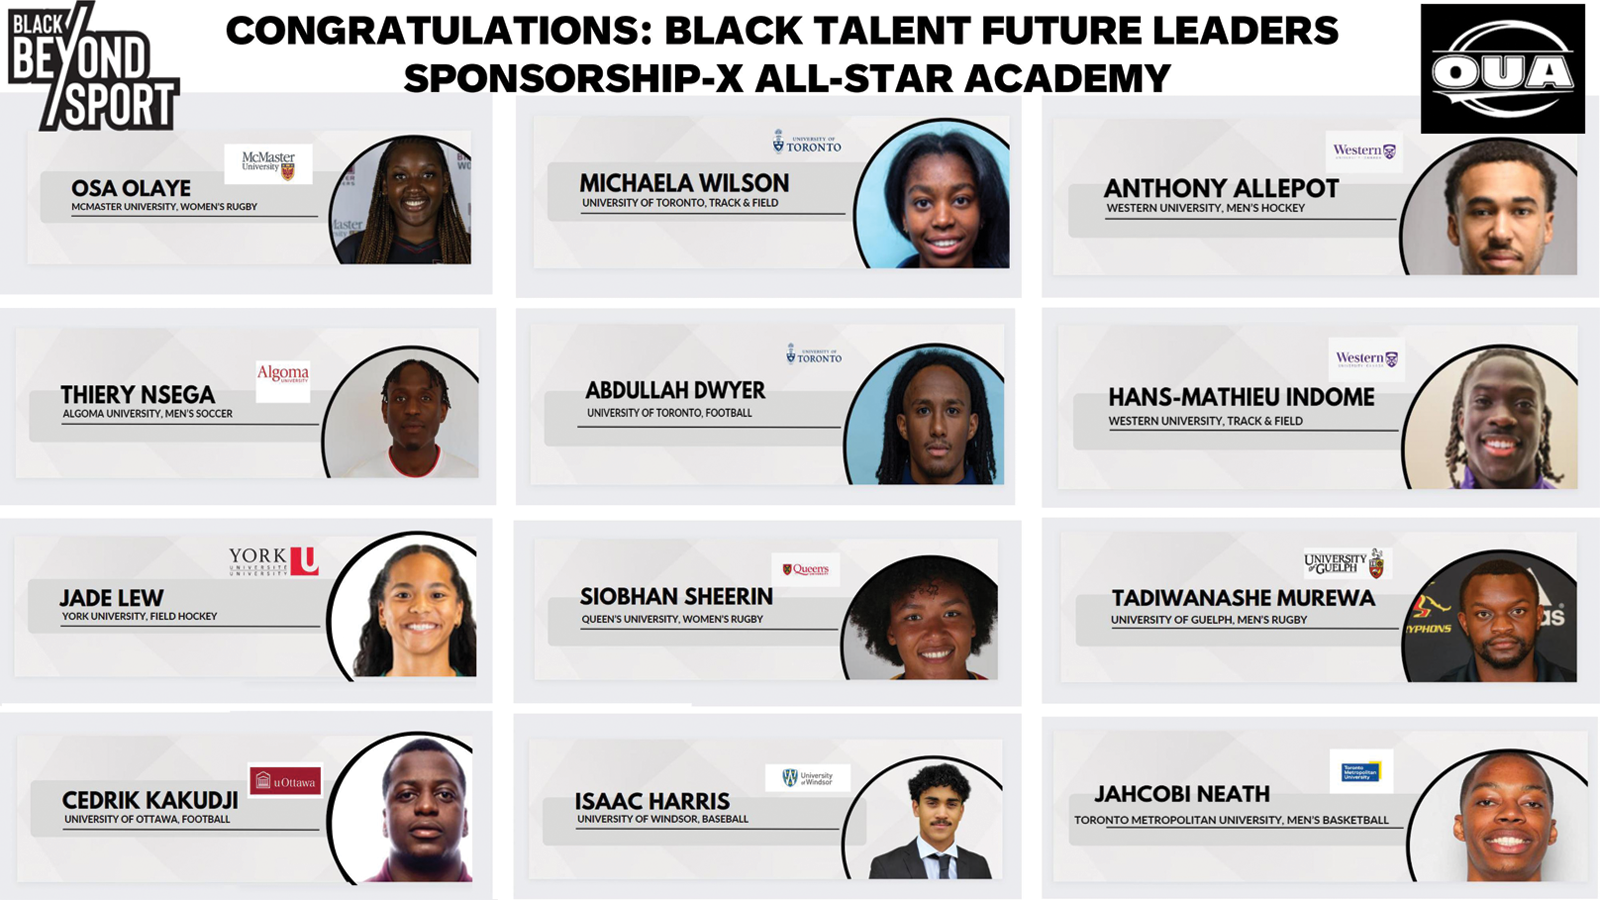 Collage of 12 OUA student-athlete headshots alongside their names, sports, and university logo, with bold black text at the top that reads, 'Congratulations: Black Talent Future Leaders SponsorshipX All-Star Academy', with the Black Beyond Sport and OUA logos featured in the top corners